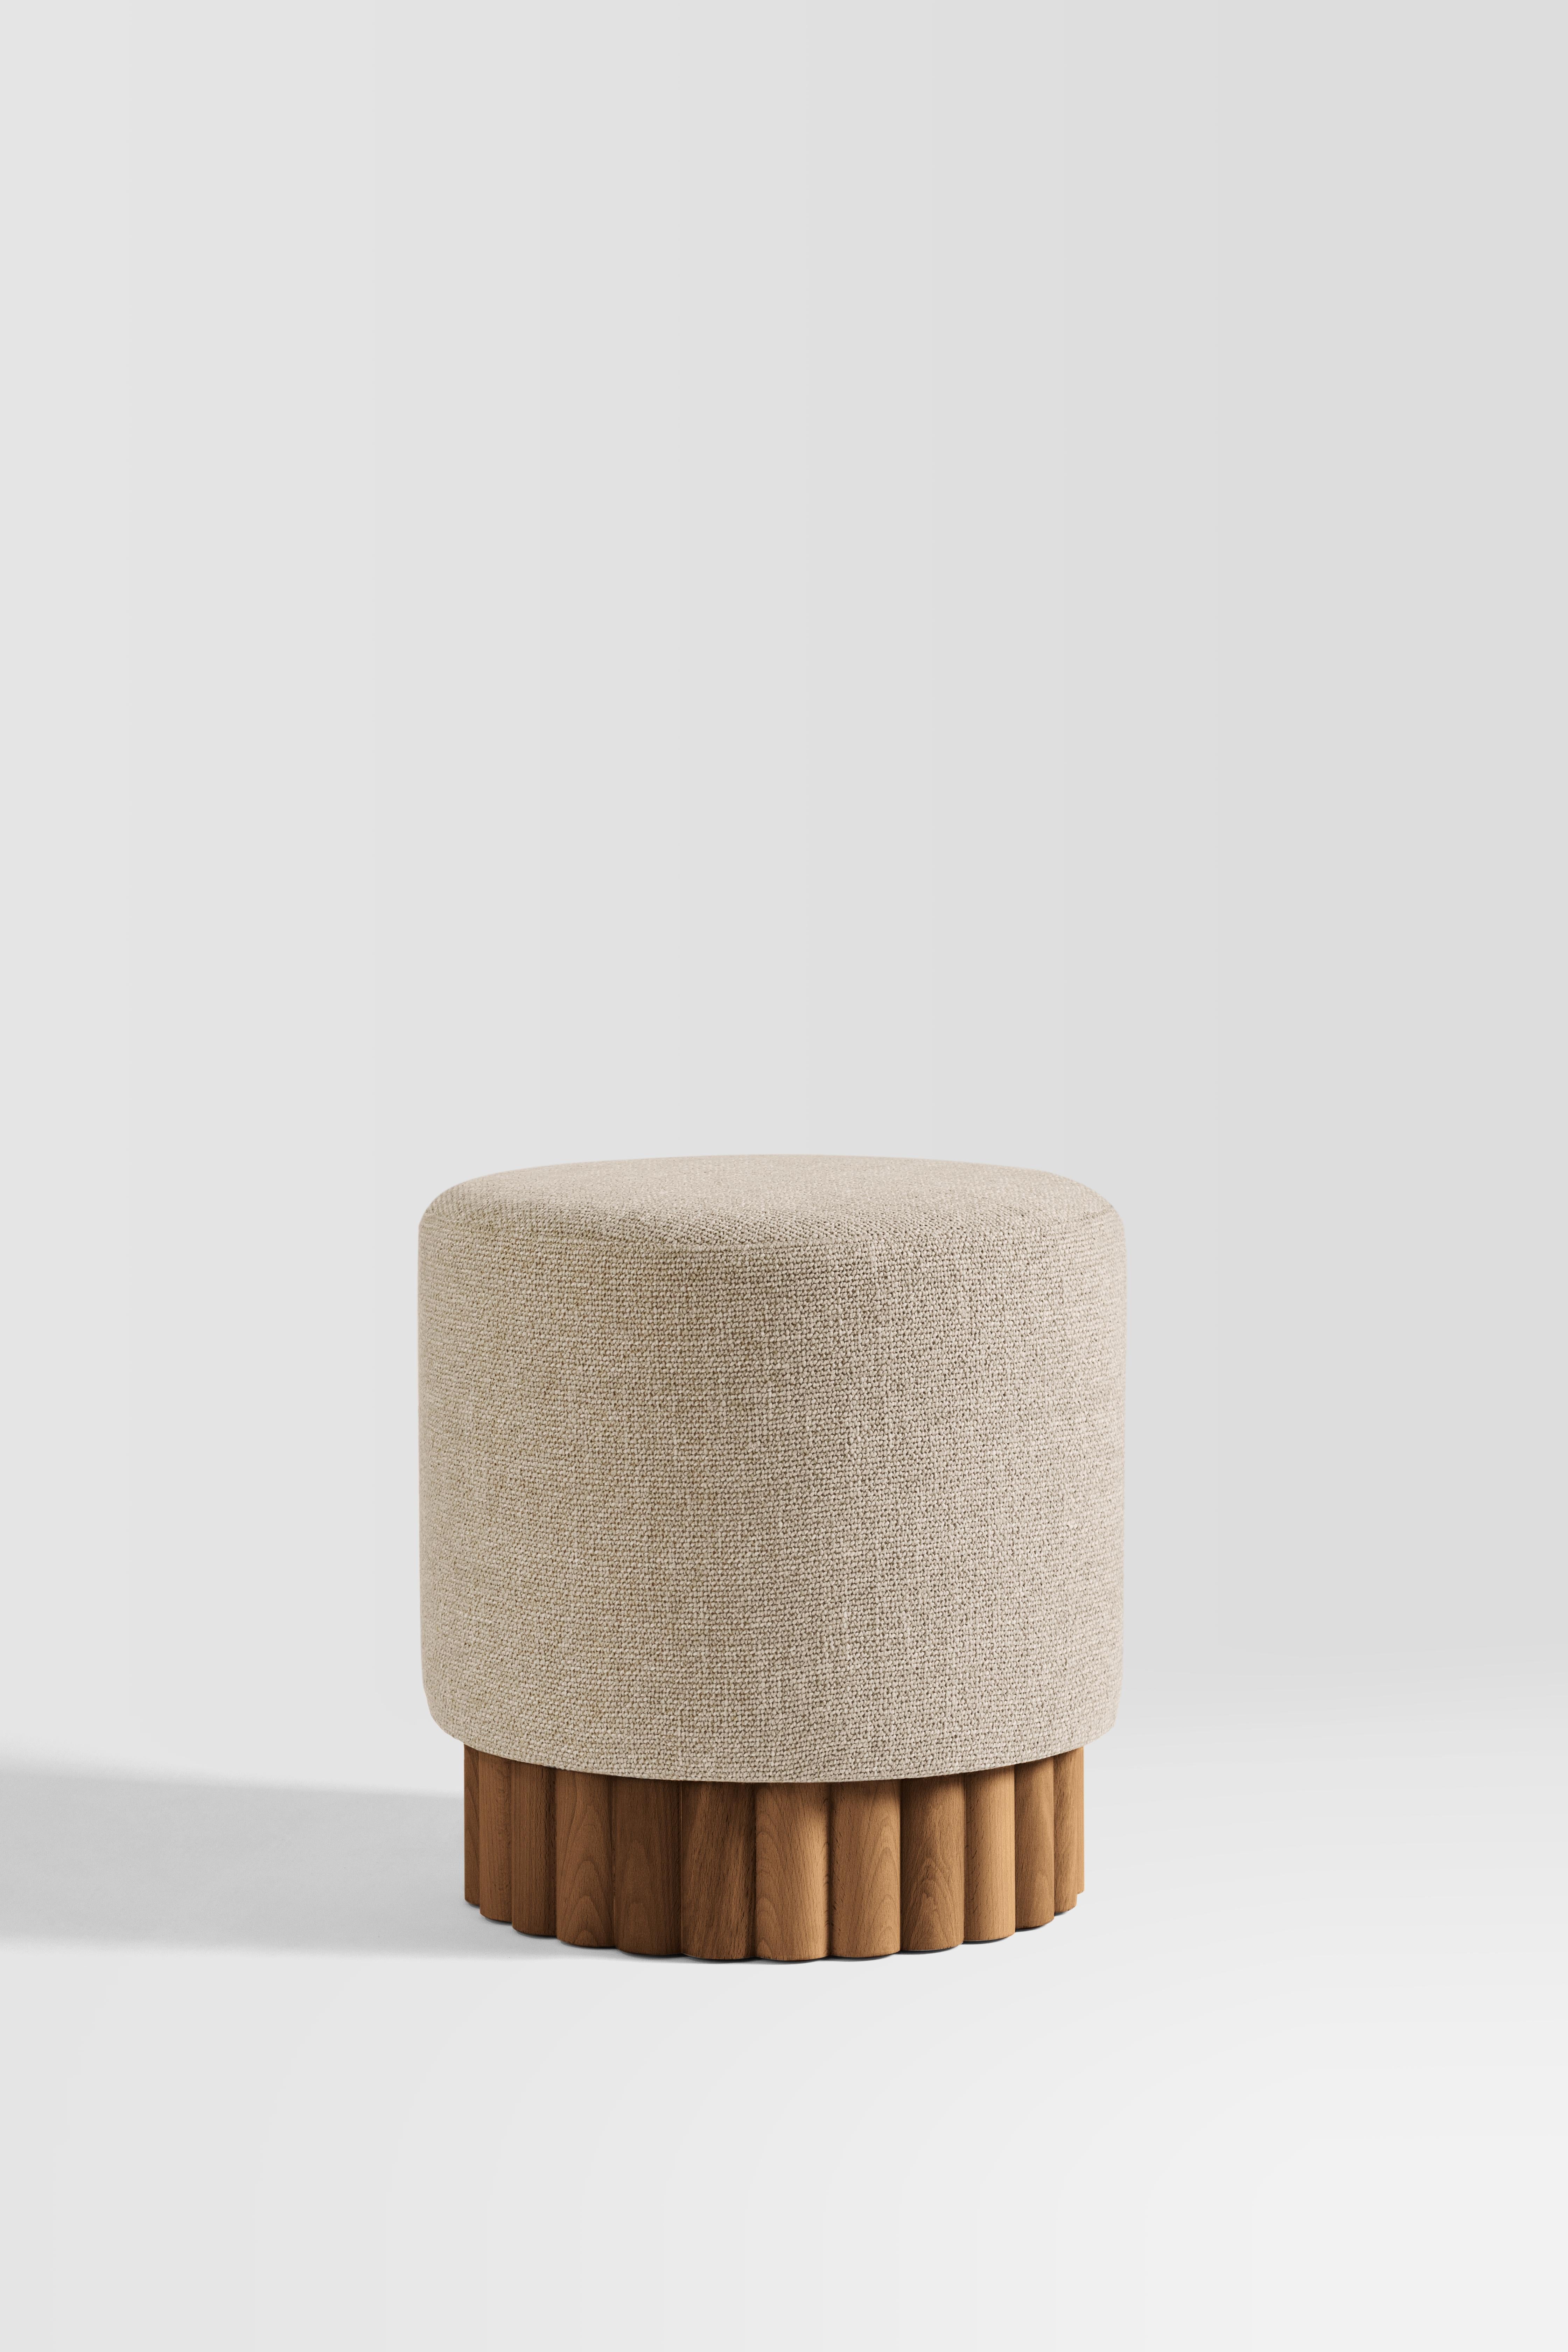 LOTO collection is the result of exploration using slender wooden dowels to compose different planes and shapes. Contrasted with materials, textures and effects, we have achieved a collection of statement pieces that are both elegant and